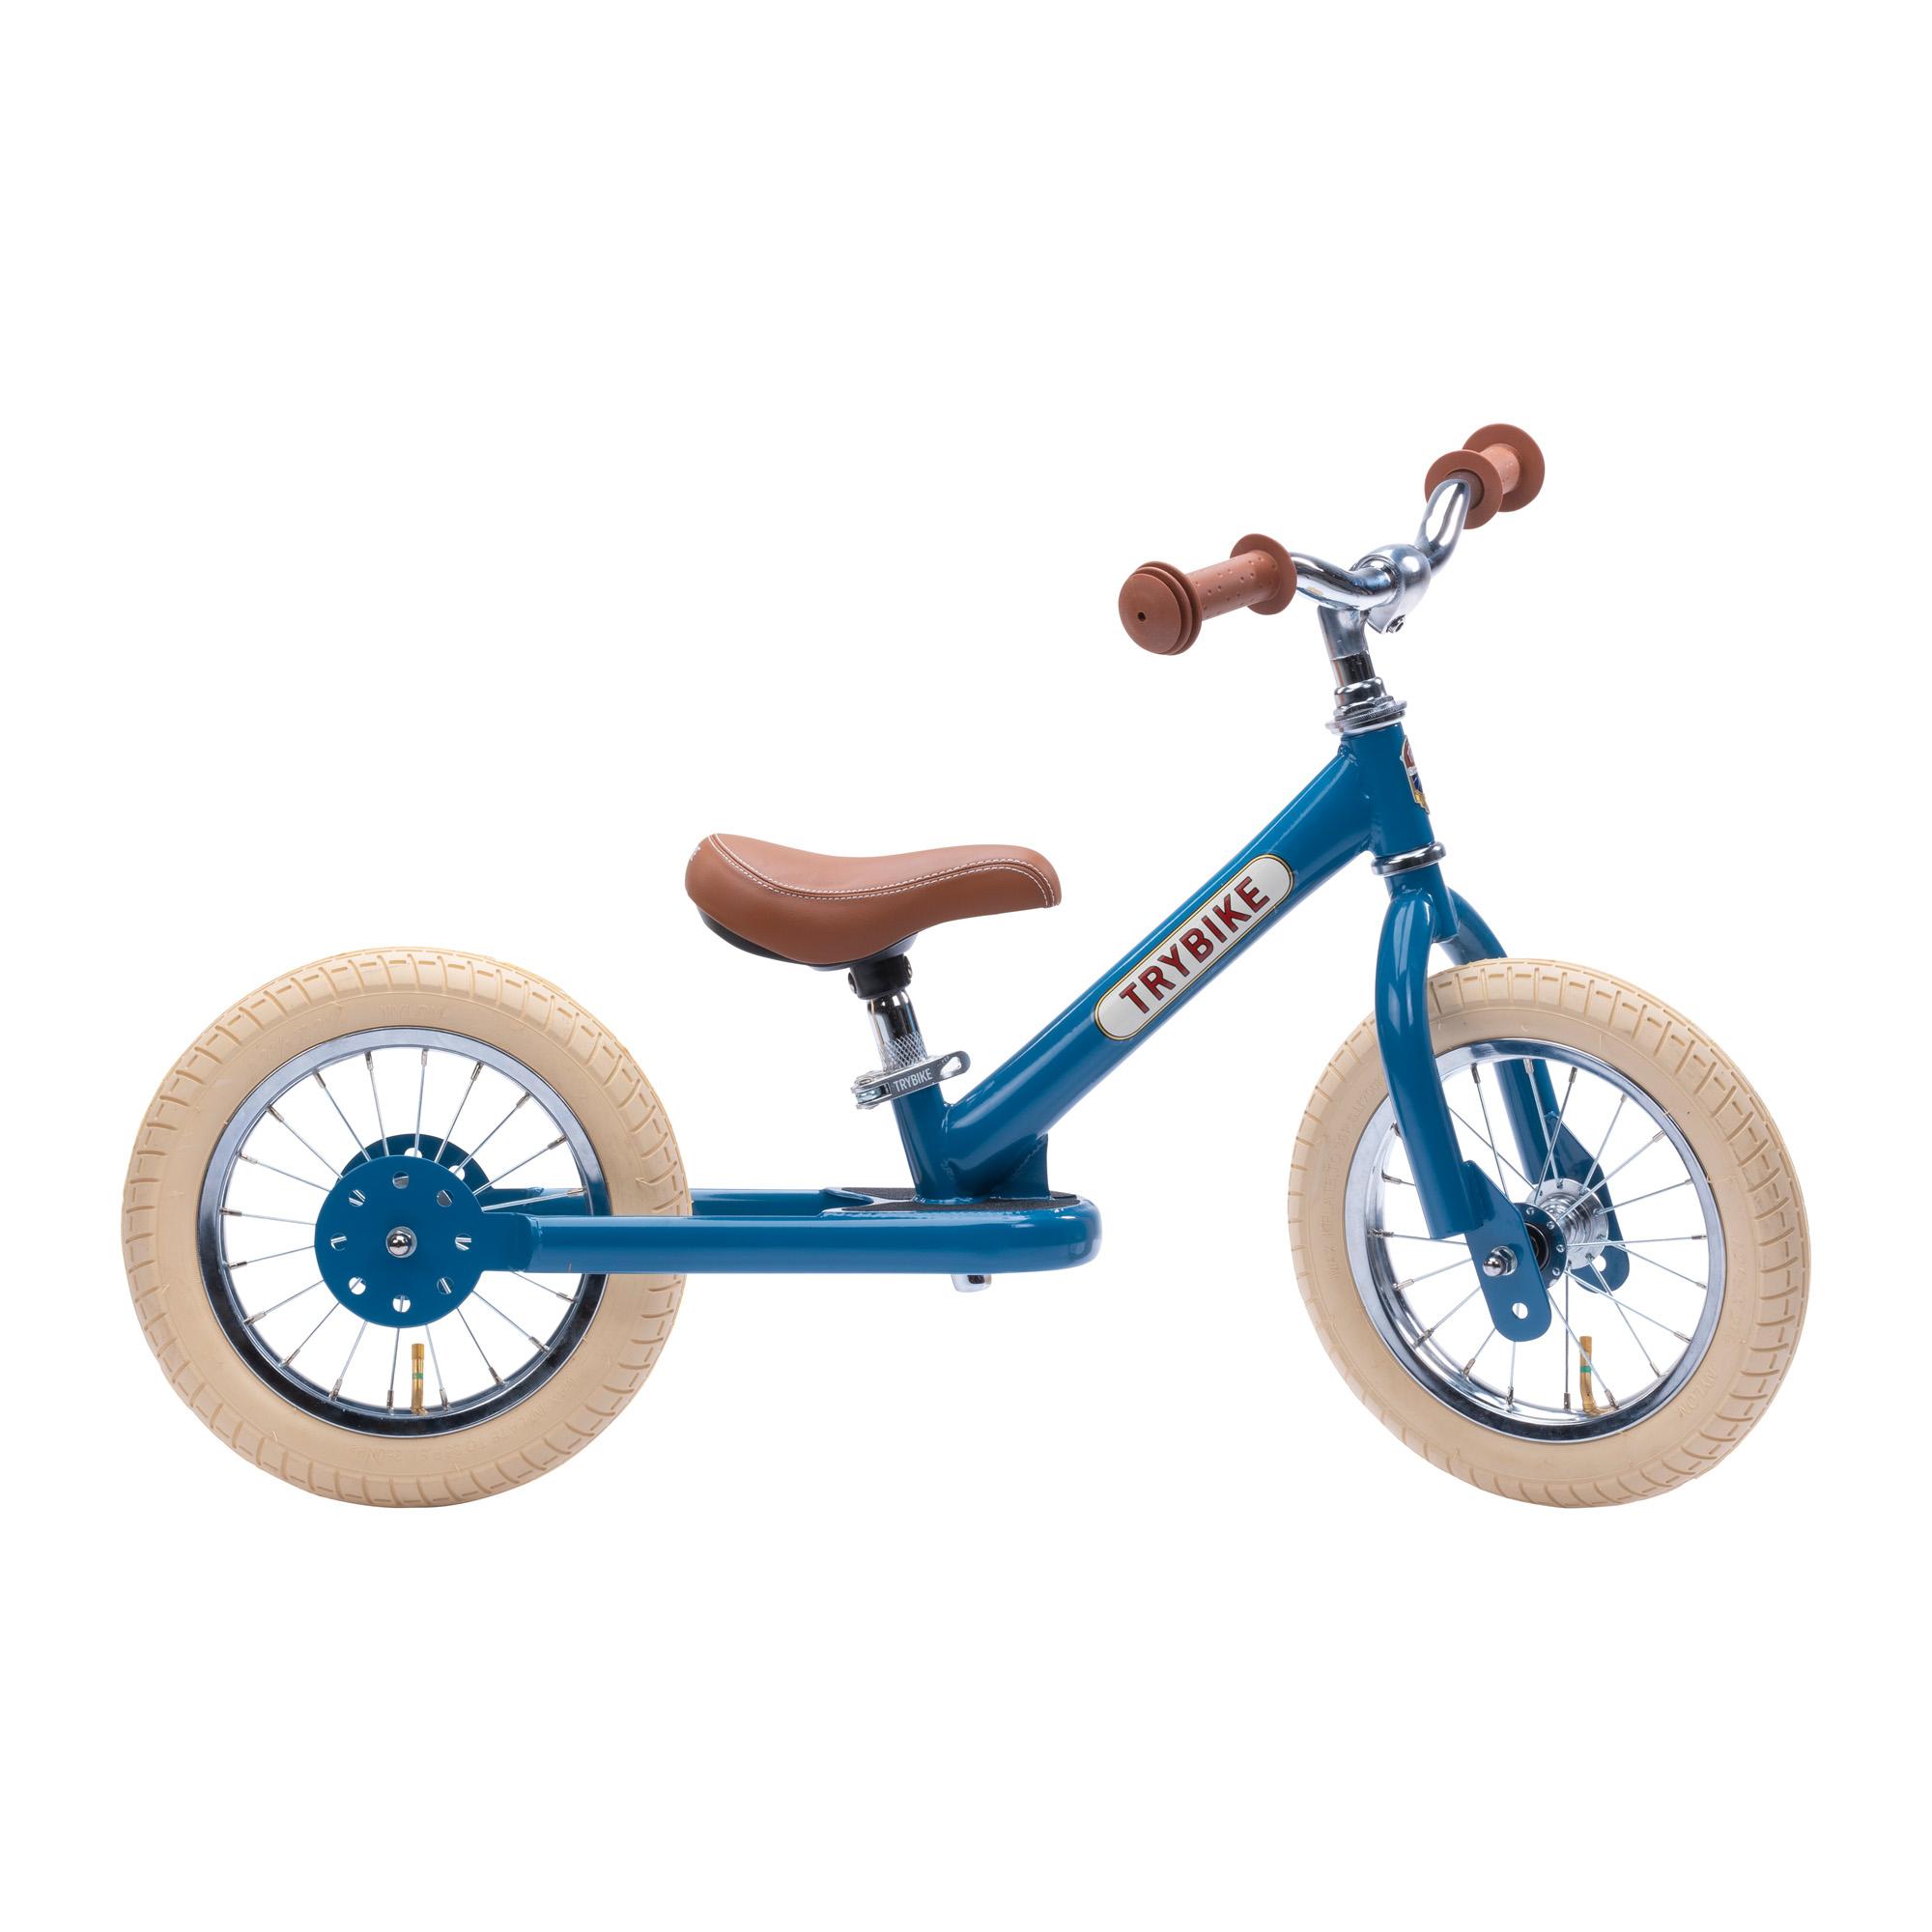 Side view of blue Trybike with cream tires and brown handles and seat.